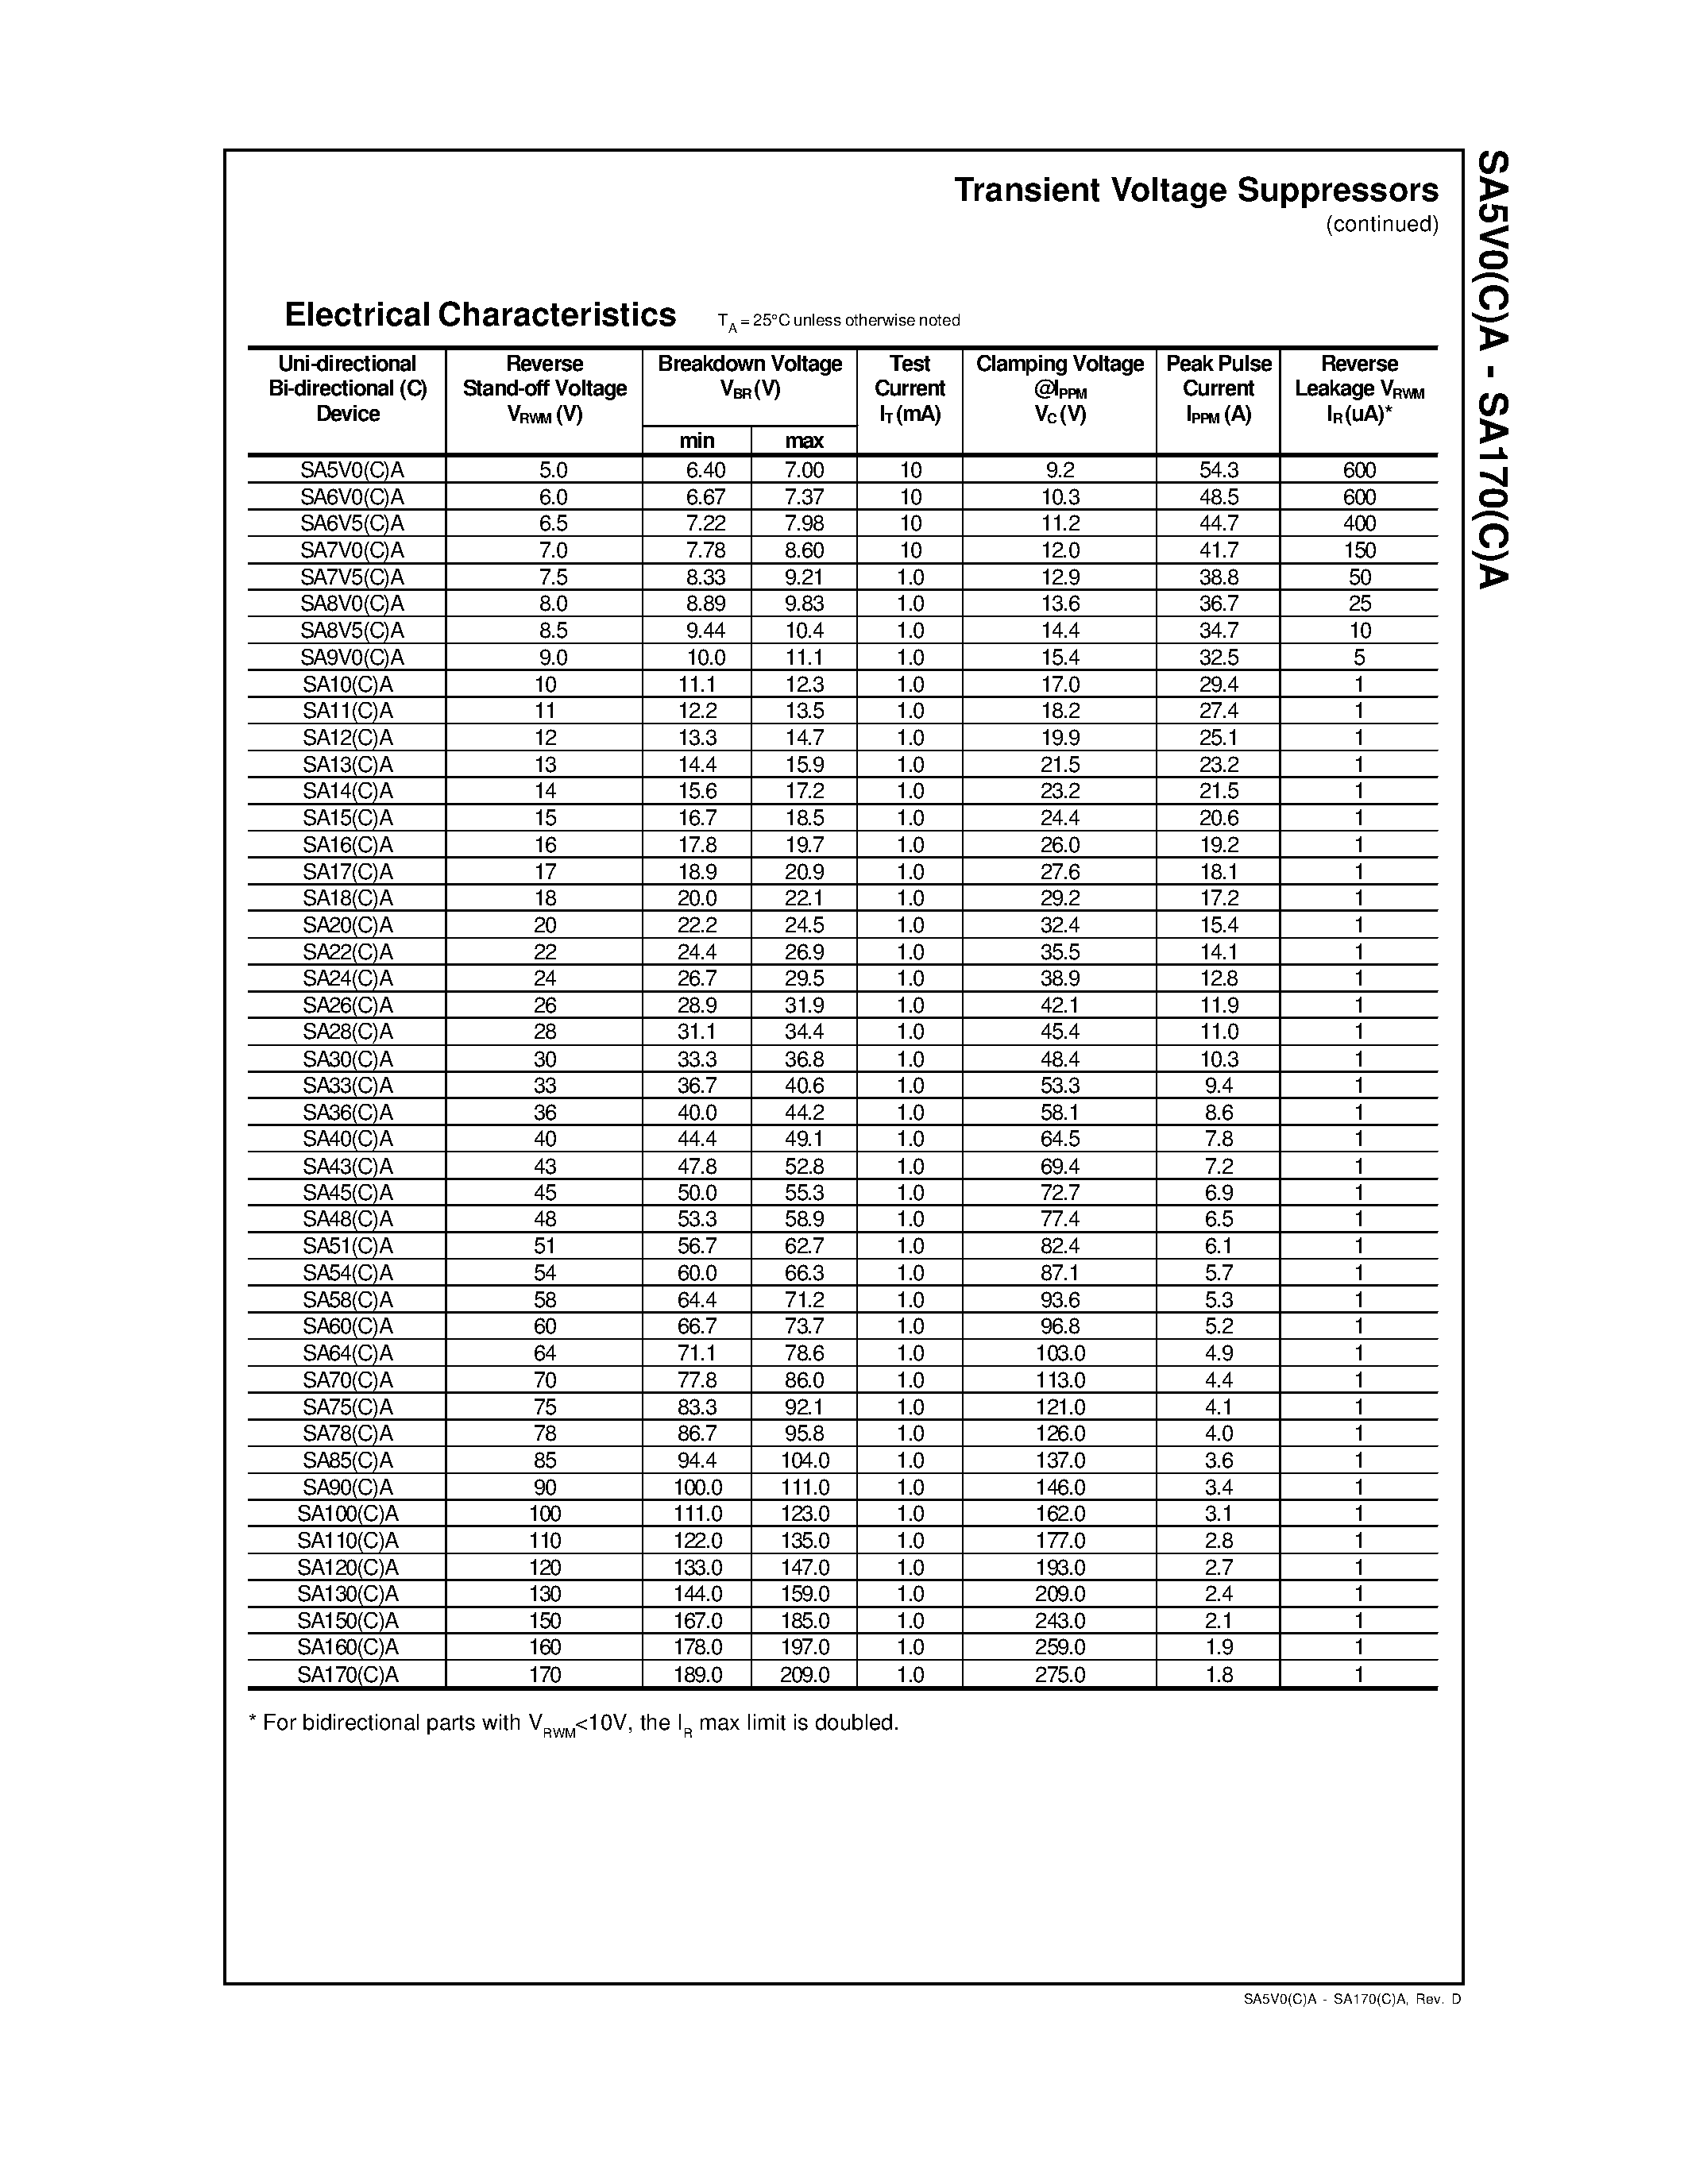 Datasheet SA26A - Transient Voltage Suppressors page 2